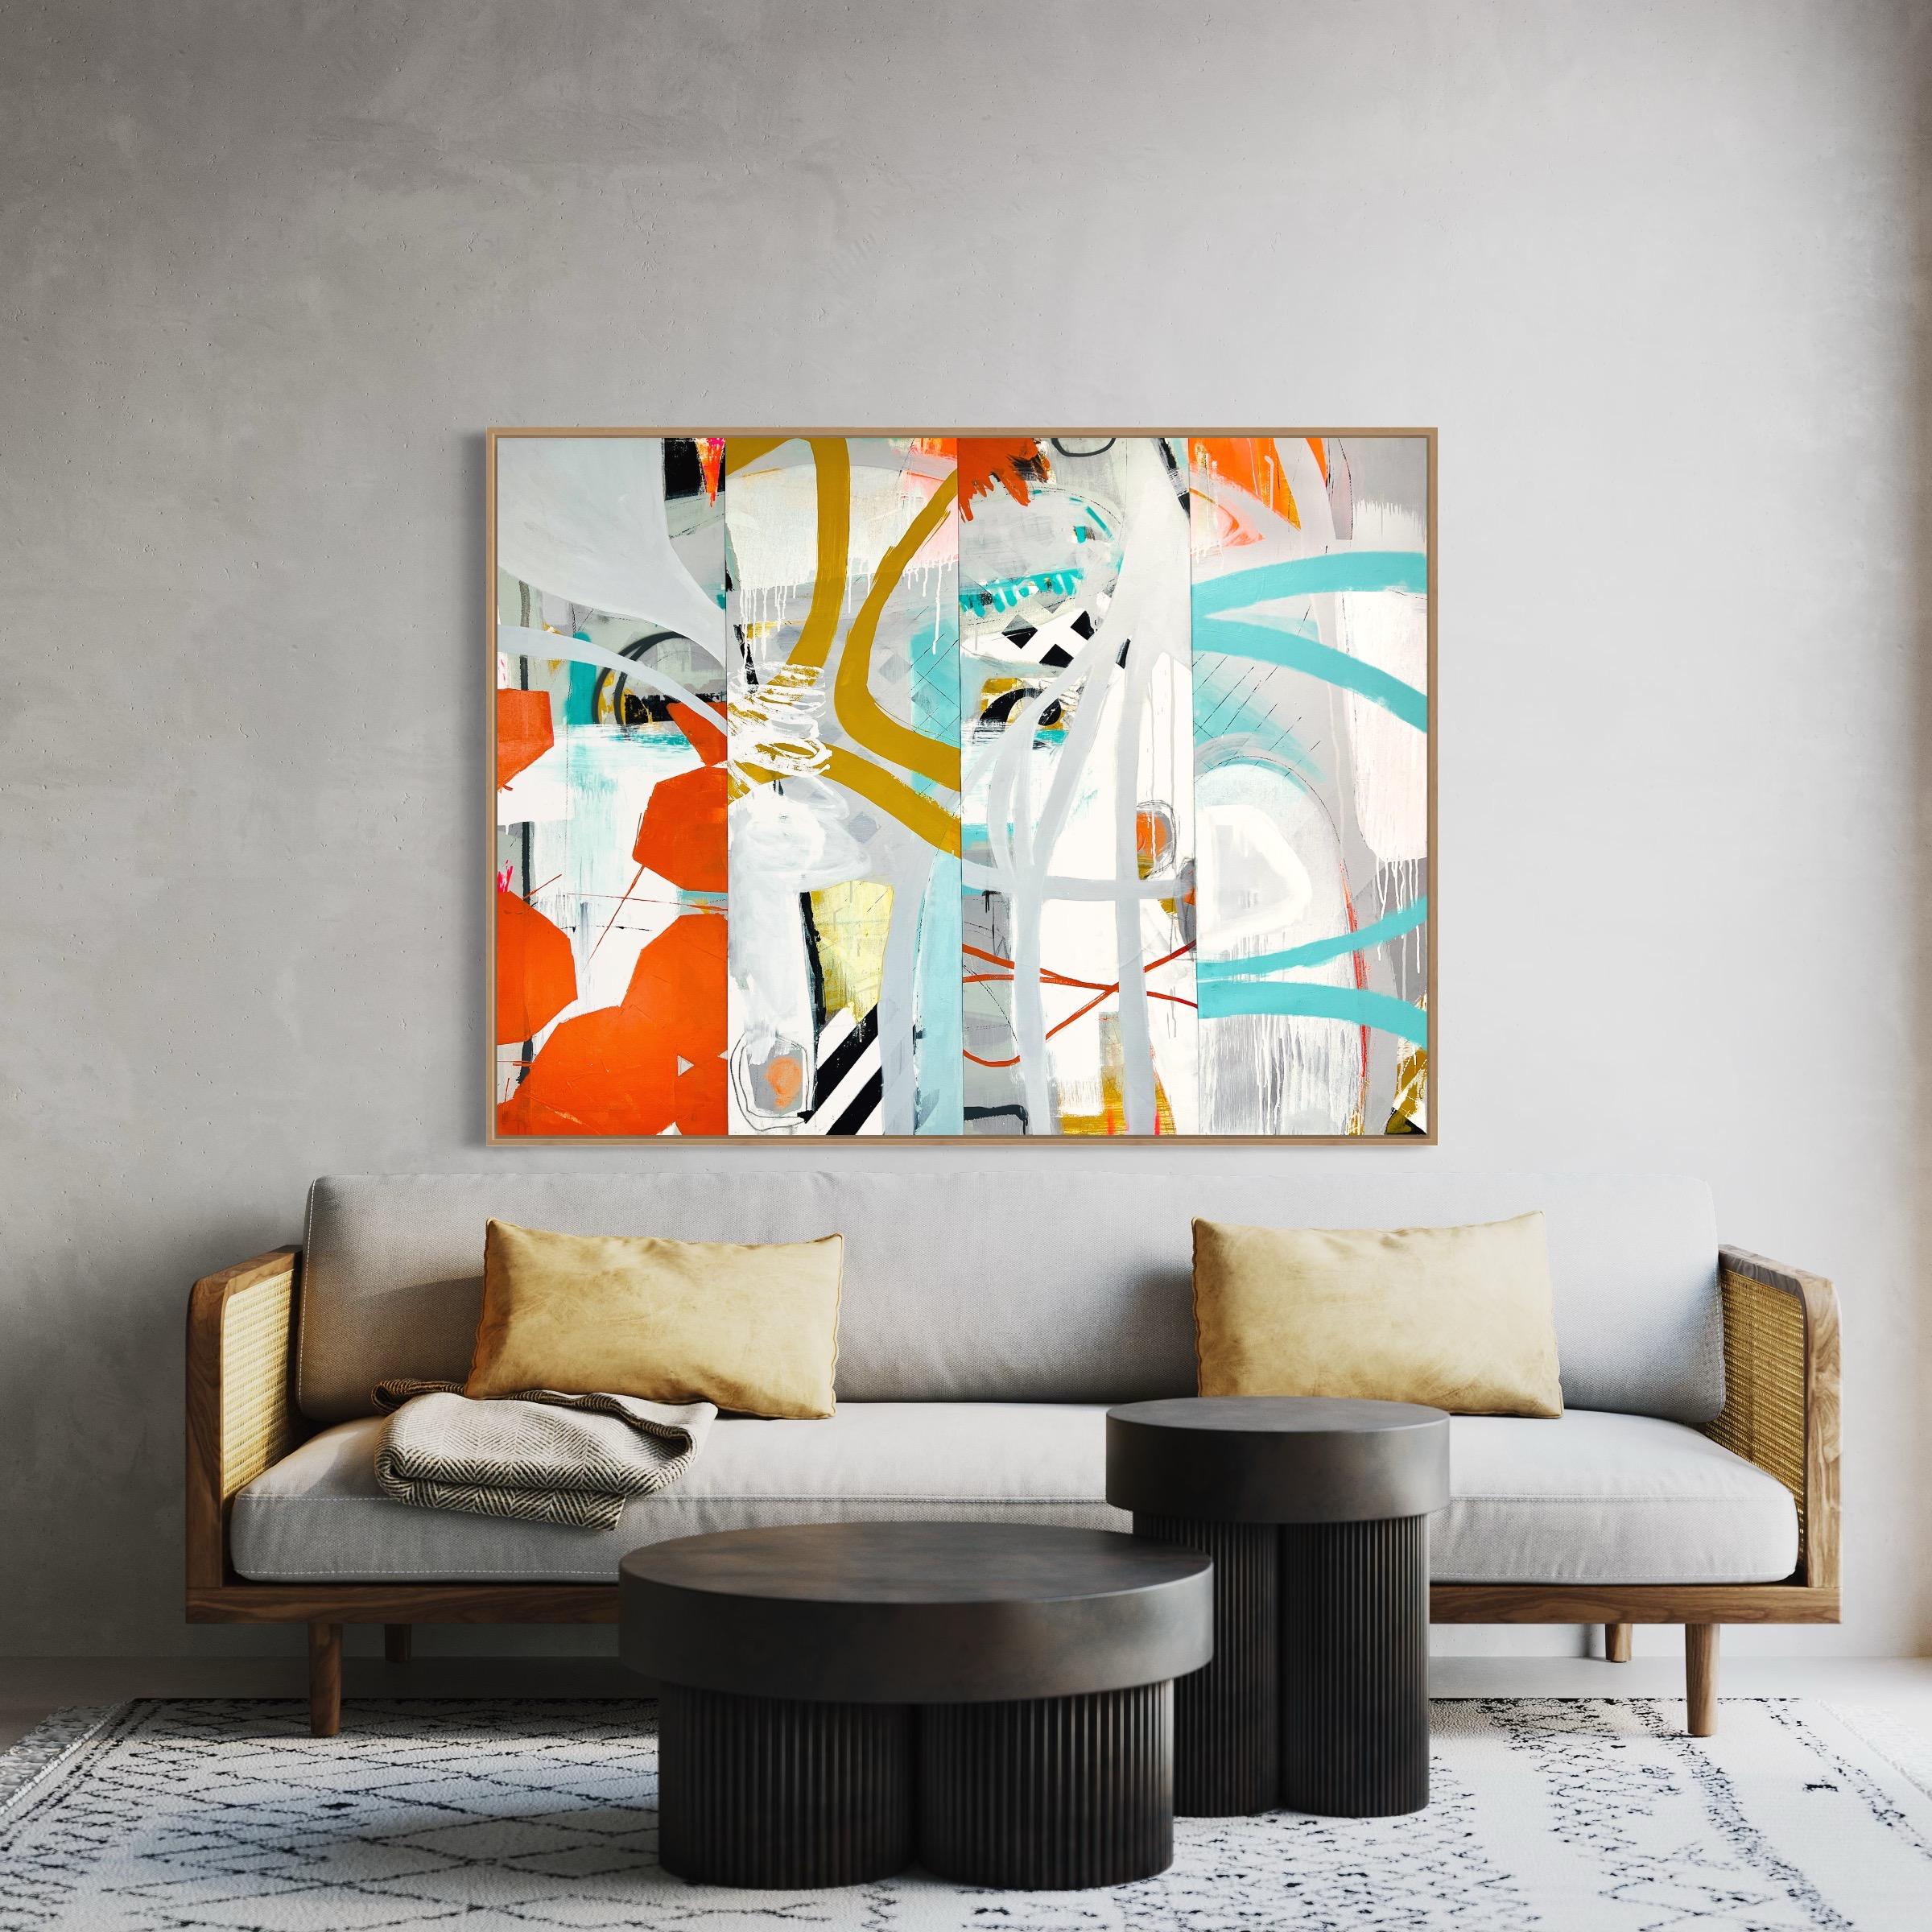 Mohnstich, Original Contemporary Bright Abstract Patterned Collage Painting (Grau), Abstract Painting, von Sarah Finucane